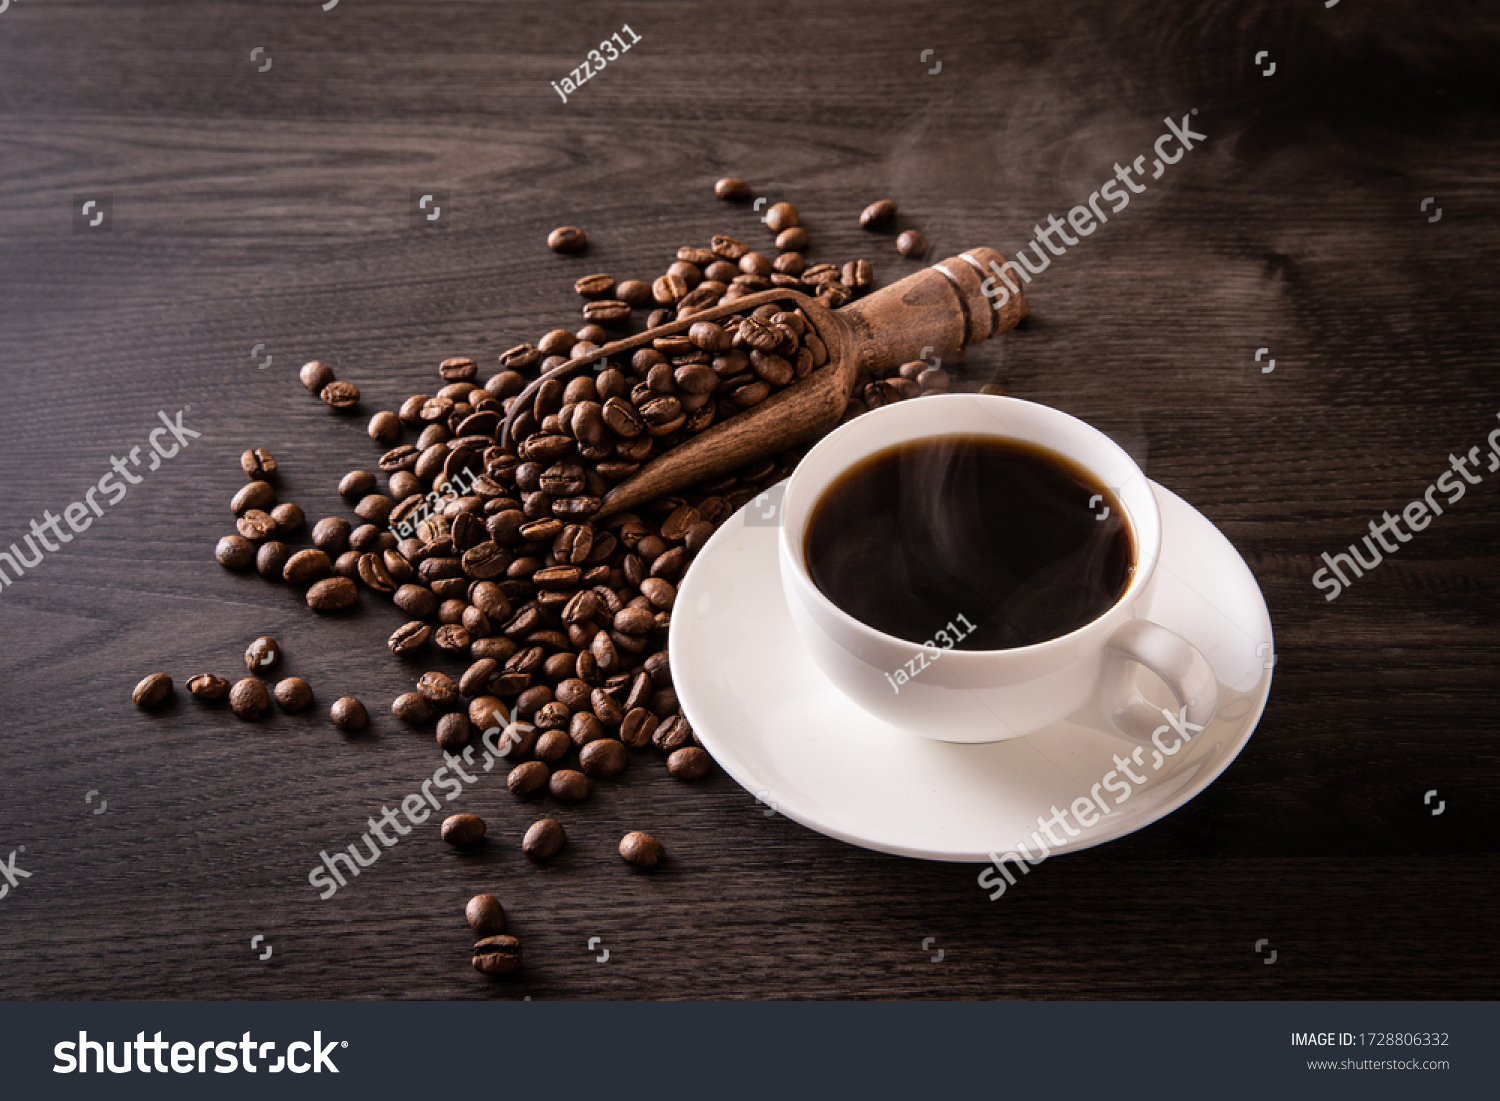 Coffee beans and hot coffee on the table #1728806332